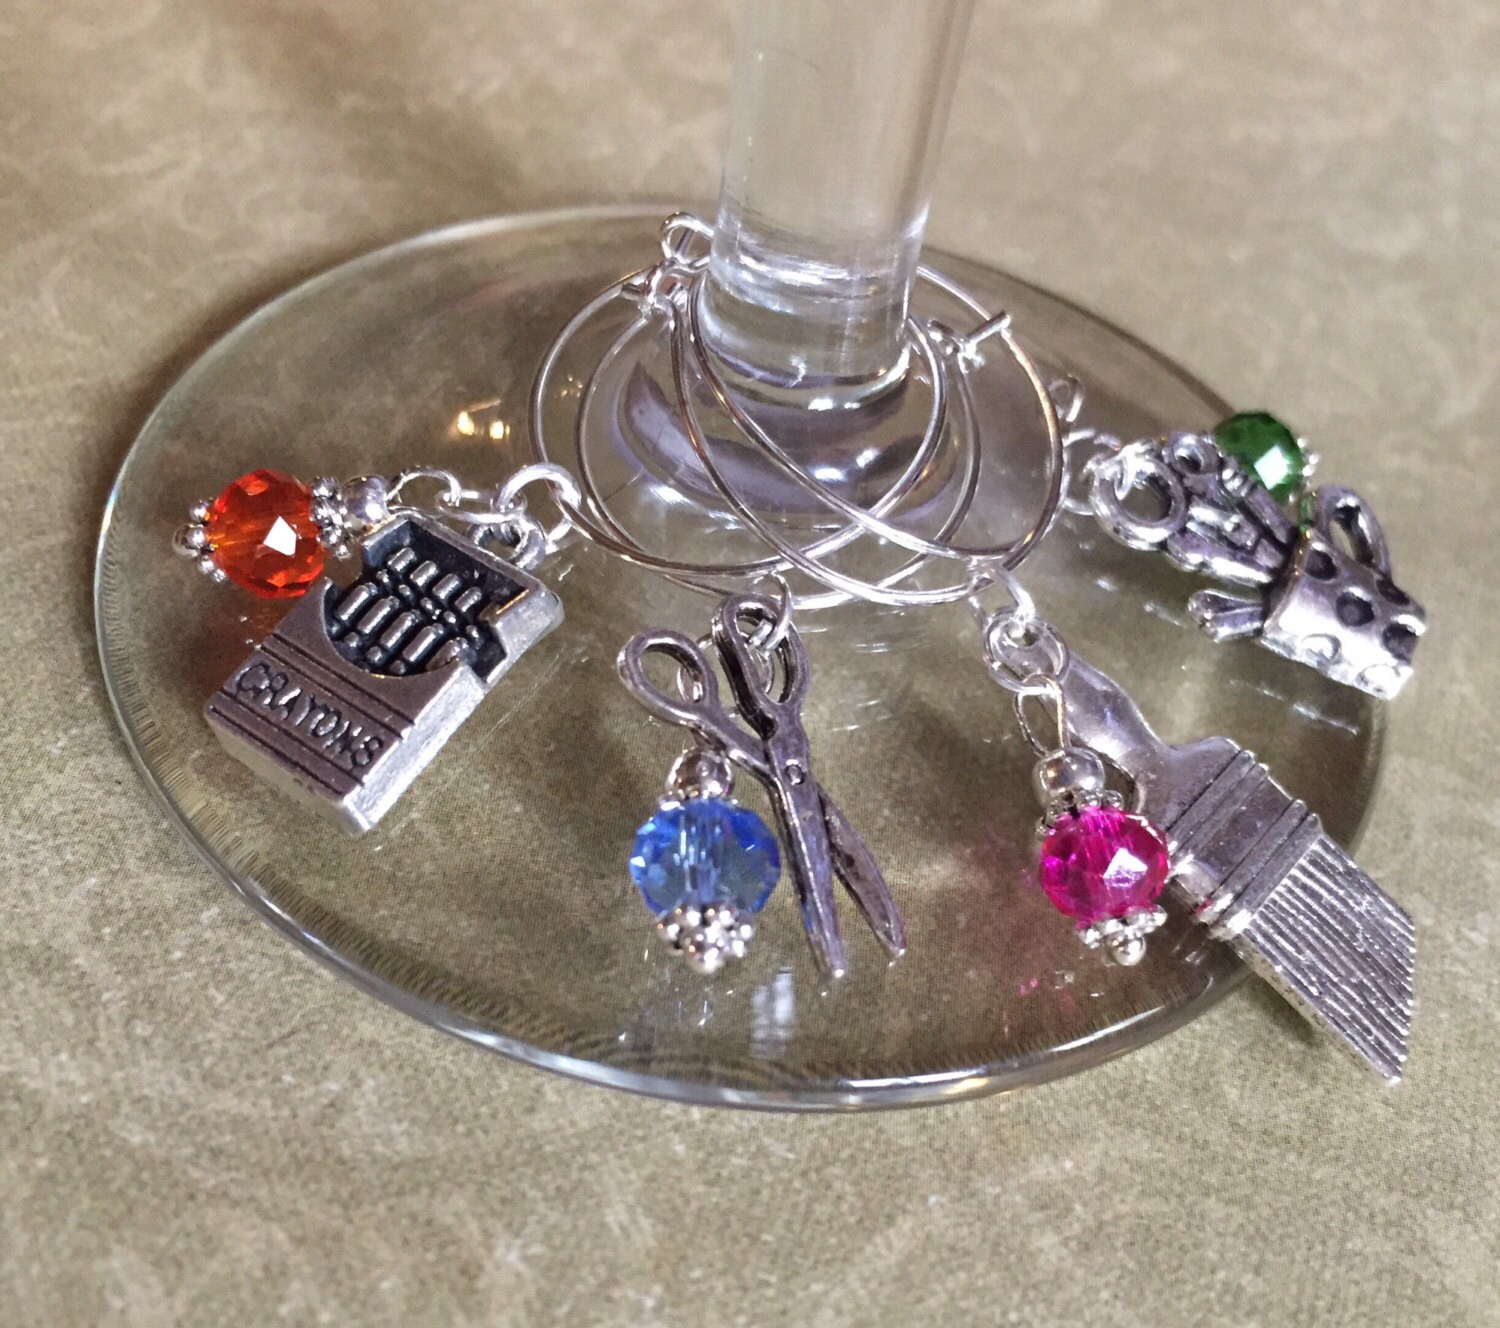 Lord of the Rings Wine Glass Charms